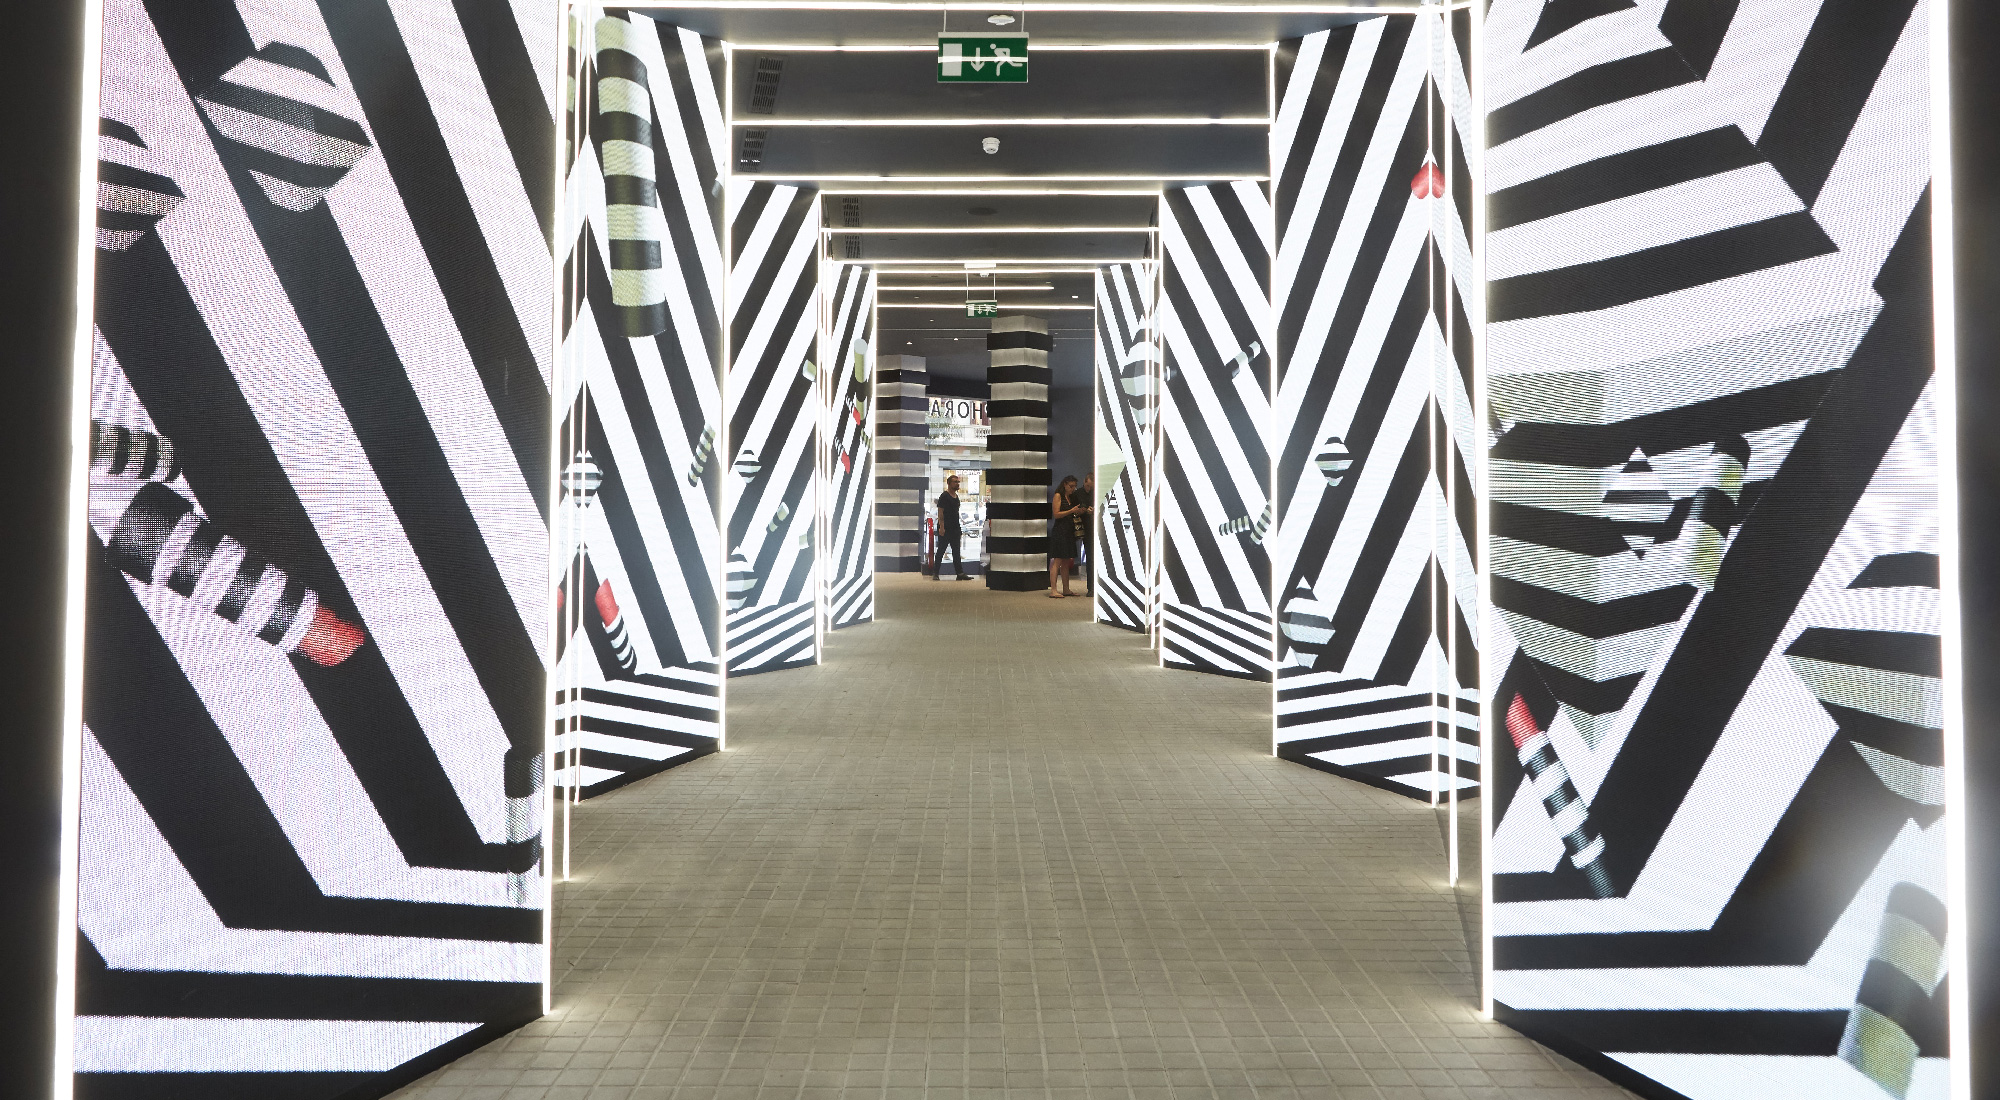 Sephora brings new digitally-enriched store concept to Spain for a